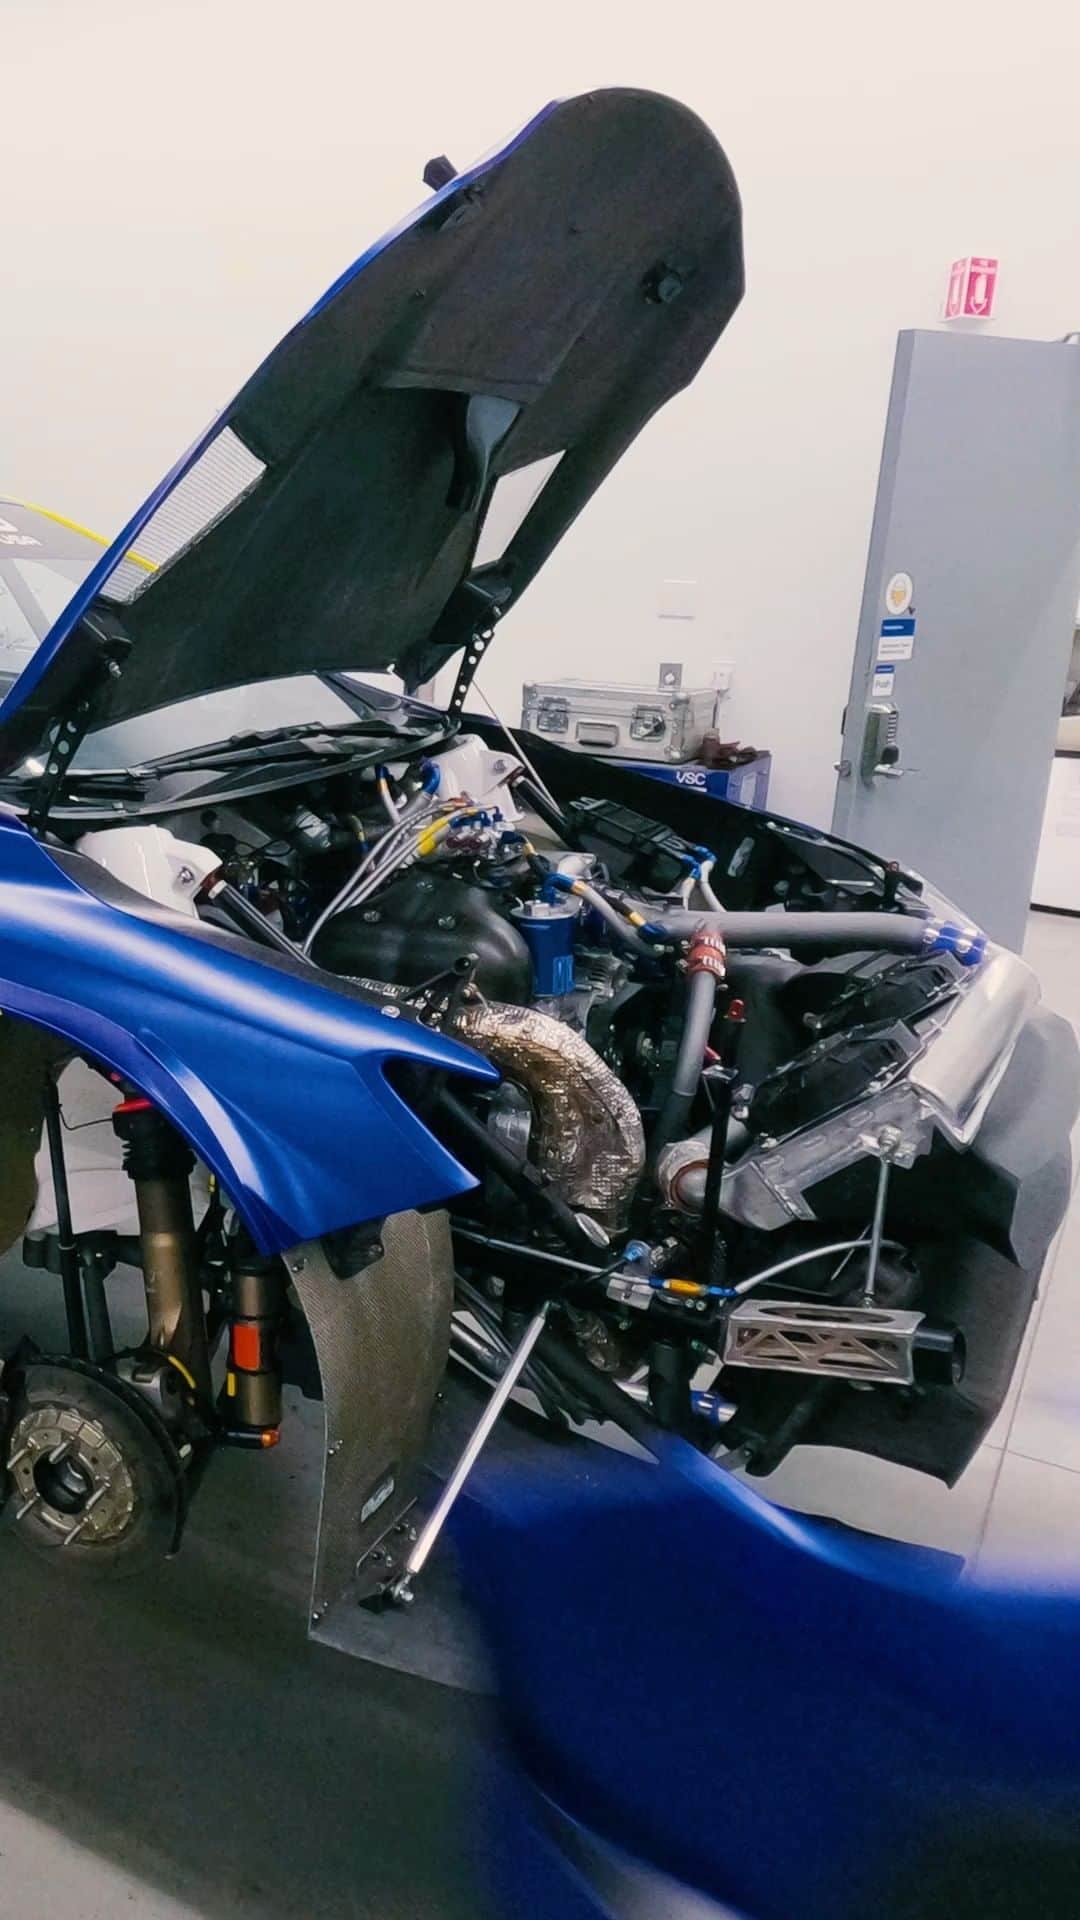 Subaru of Americaのインスタグラム：「18 months of building in 15 seconds, follow along the full process of building the new @subarumotorsportsusa rally car, link in bio for full video.」